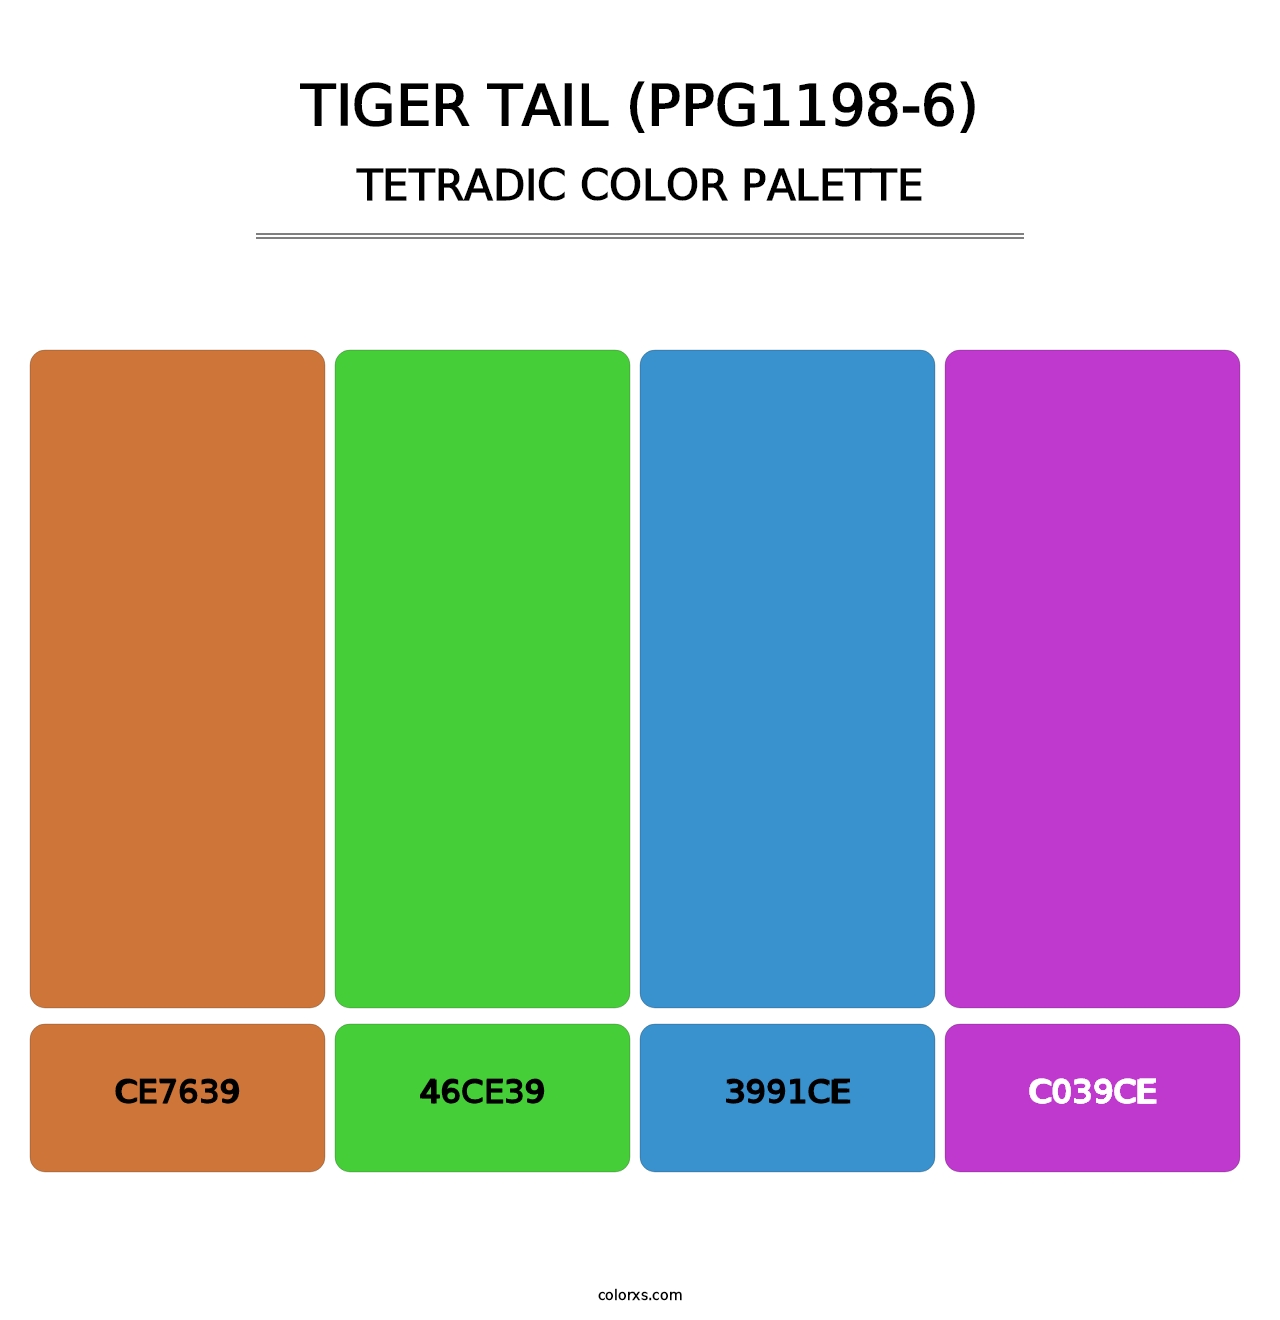 Tiger Tail (PPG1198-6) - Tetradic Color Palette